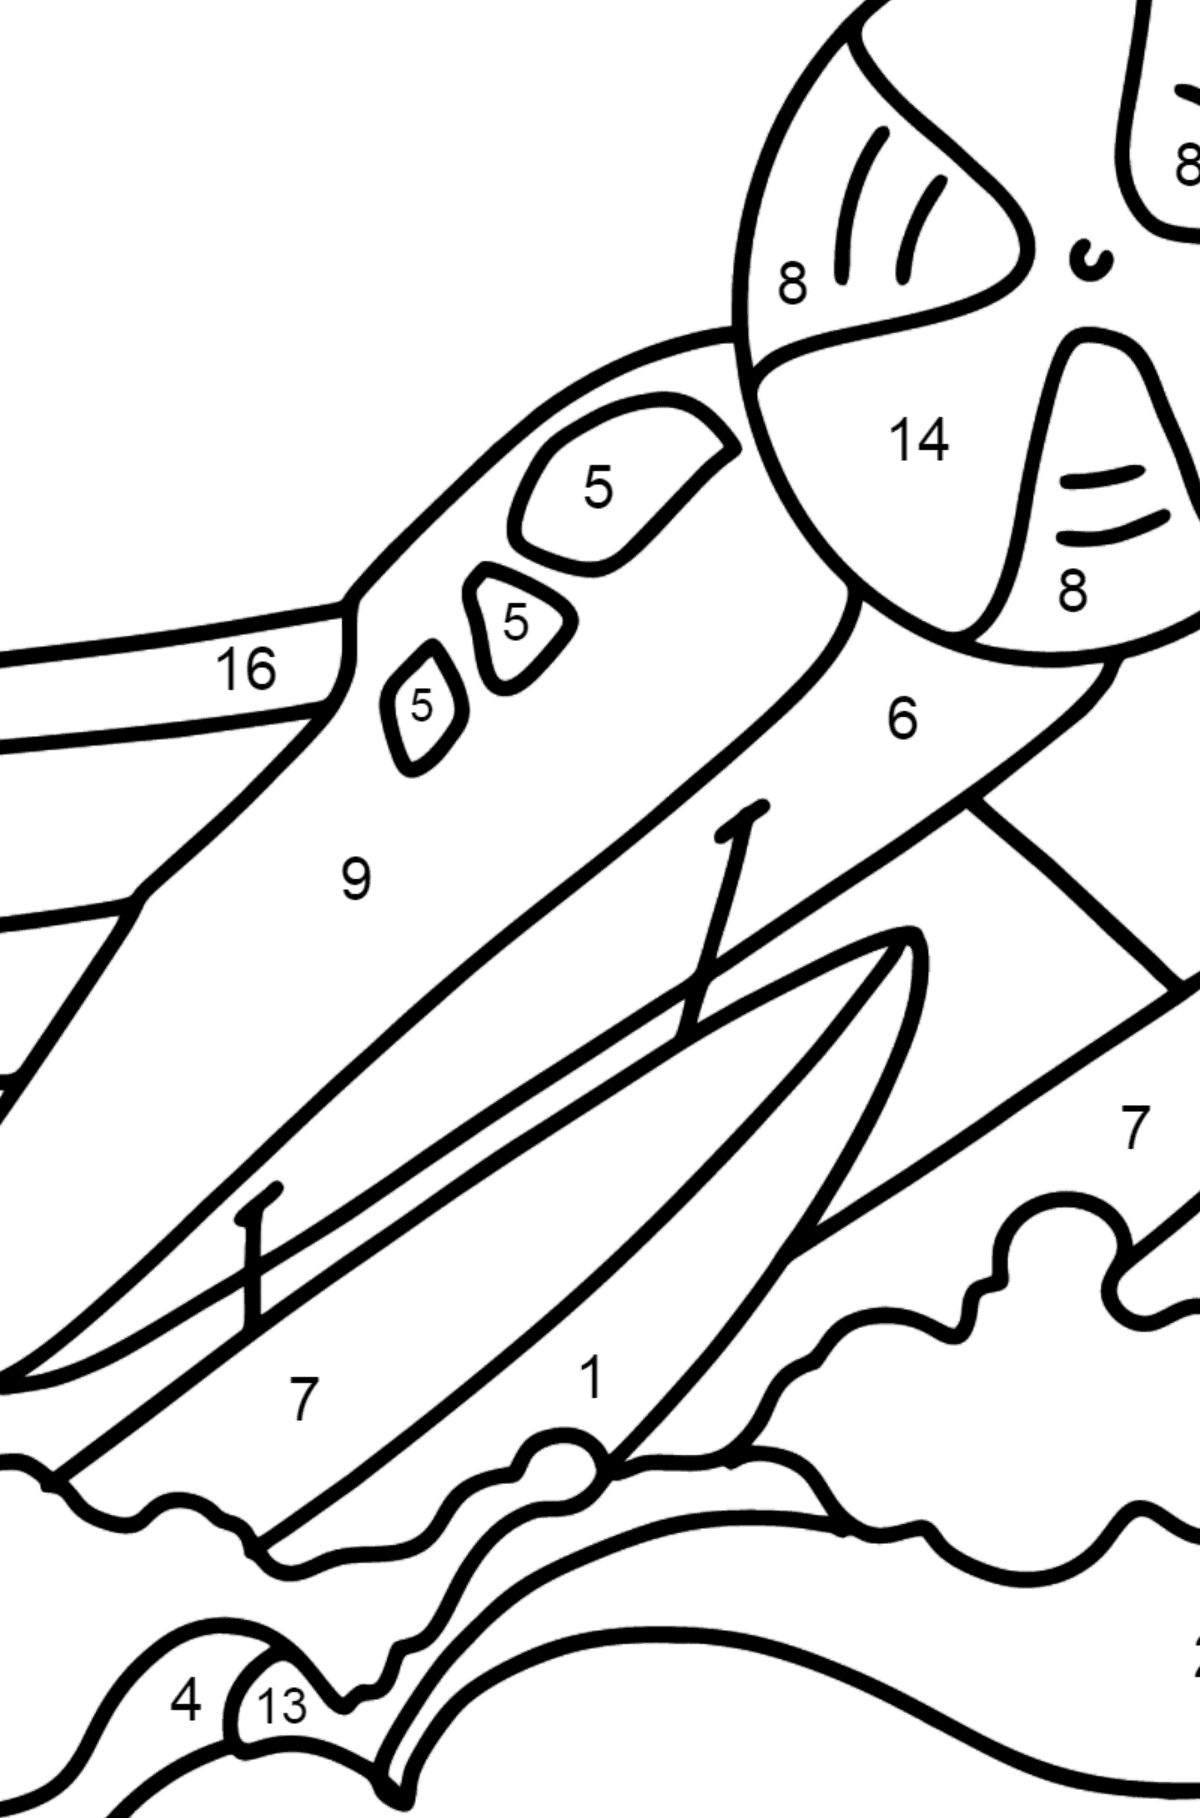 Amphibious Airplane coloring page - Coloring by Numbers for Kids